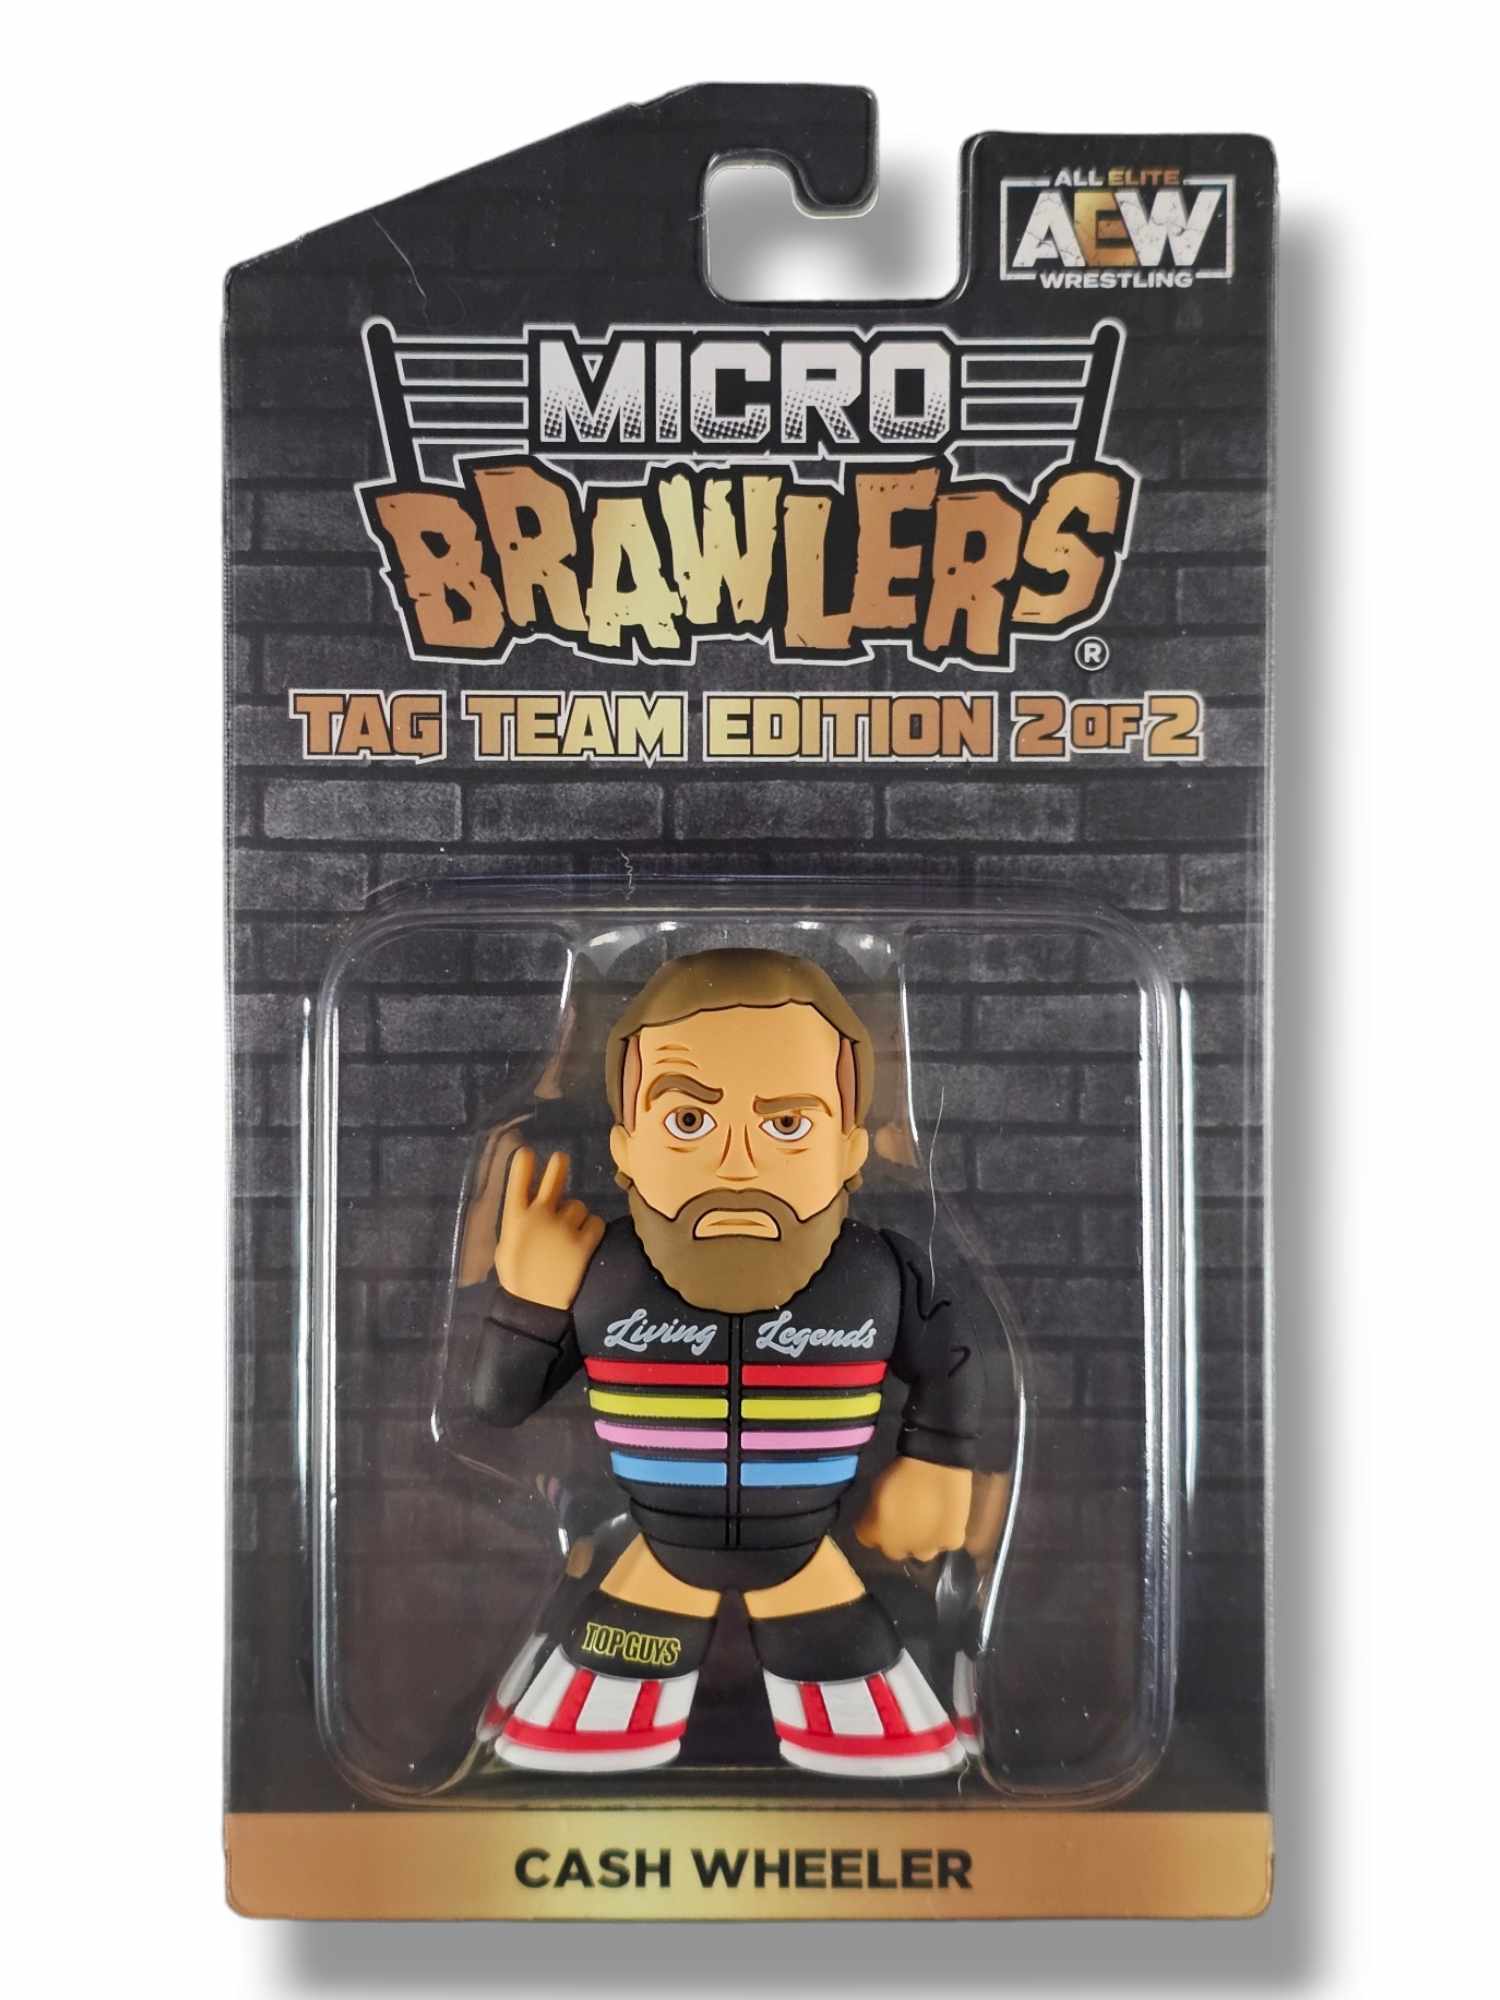 Get them now! The Wedding Exclusive Micro Brawlers